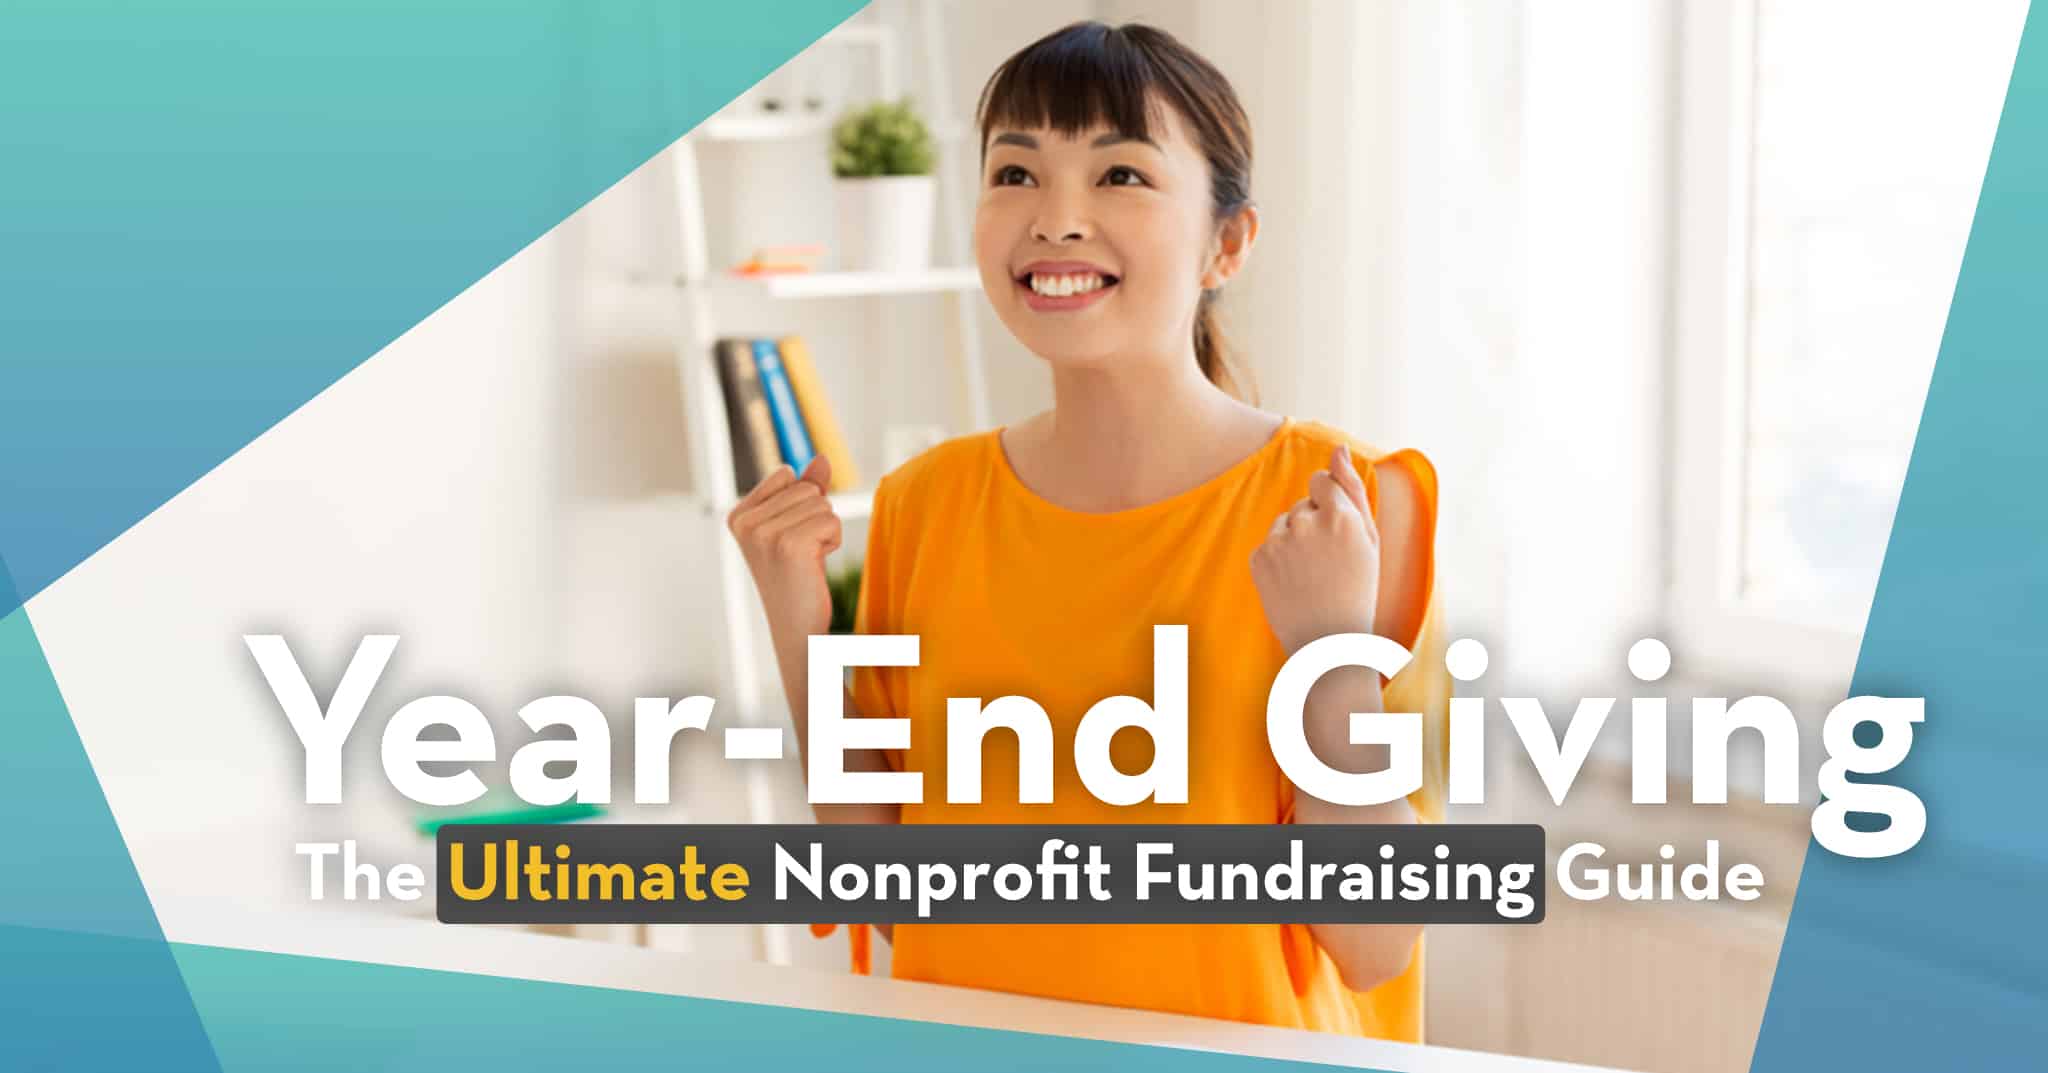 Year-End Giving | The Ultimate Nonprofit Fundraising Guide